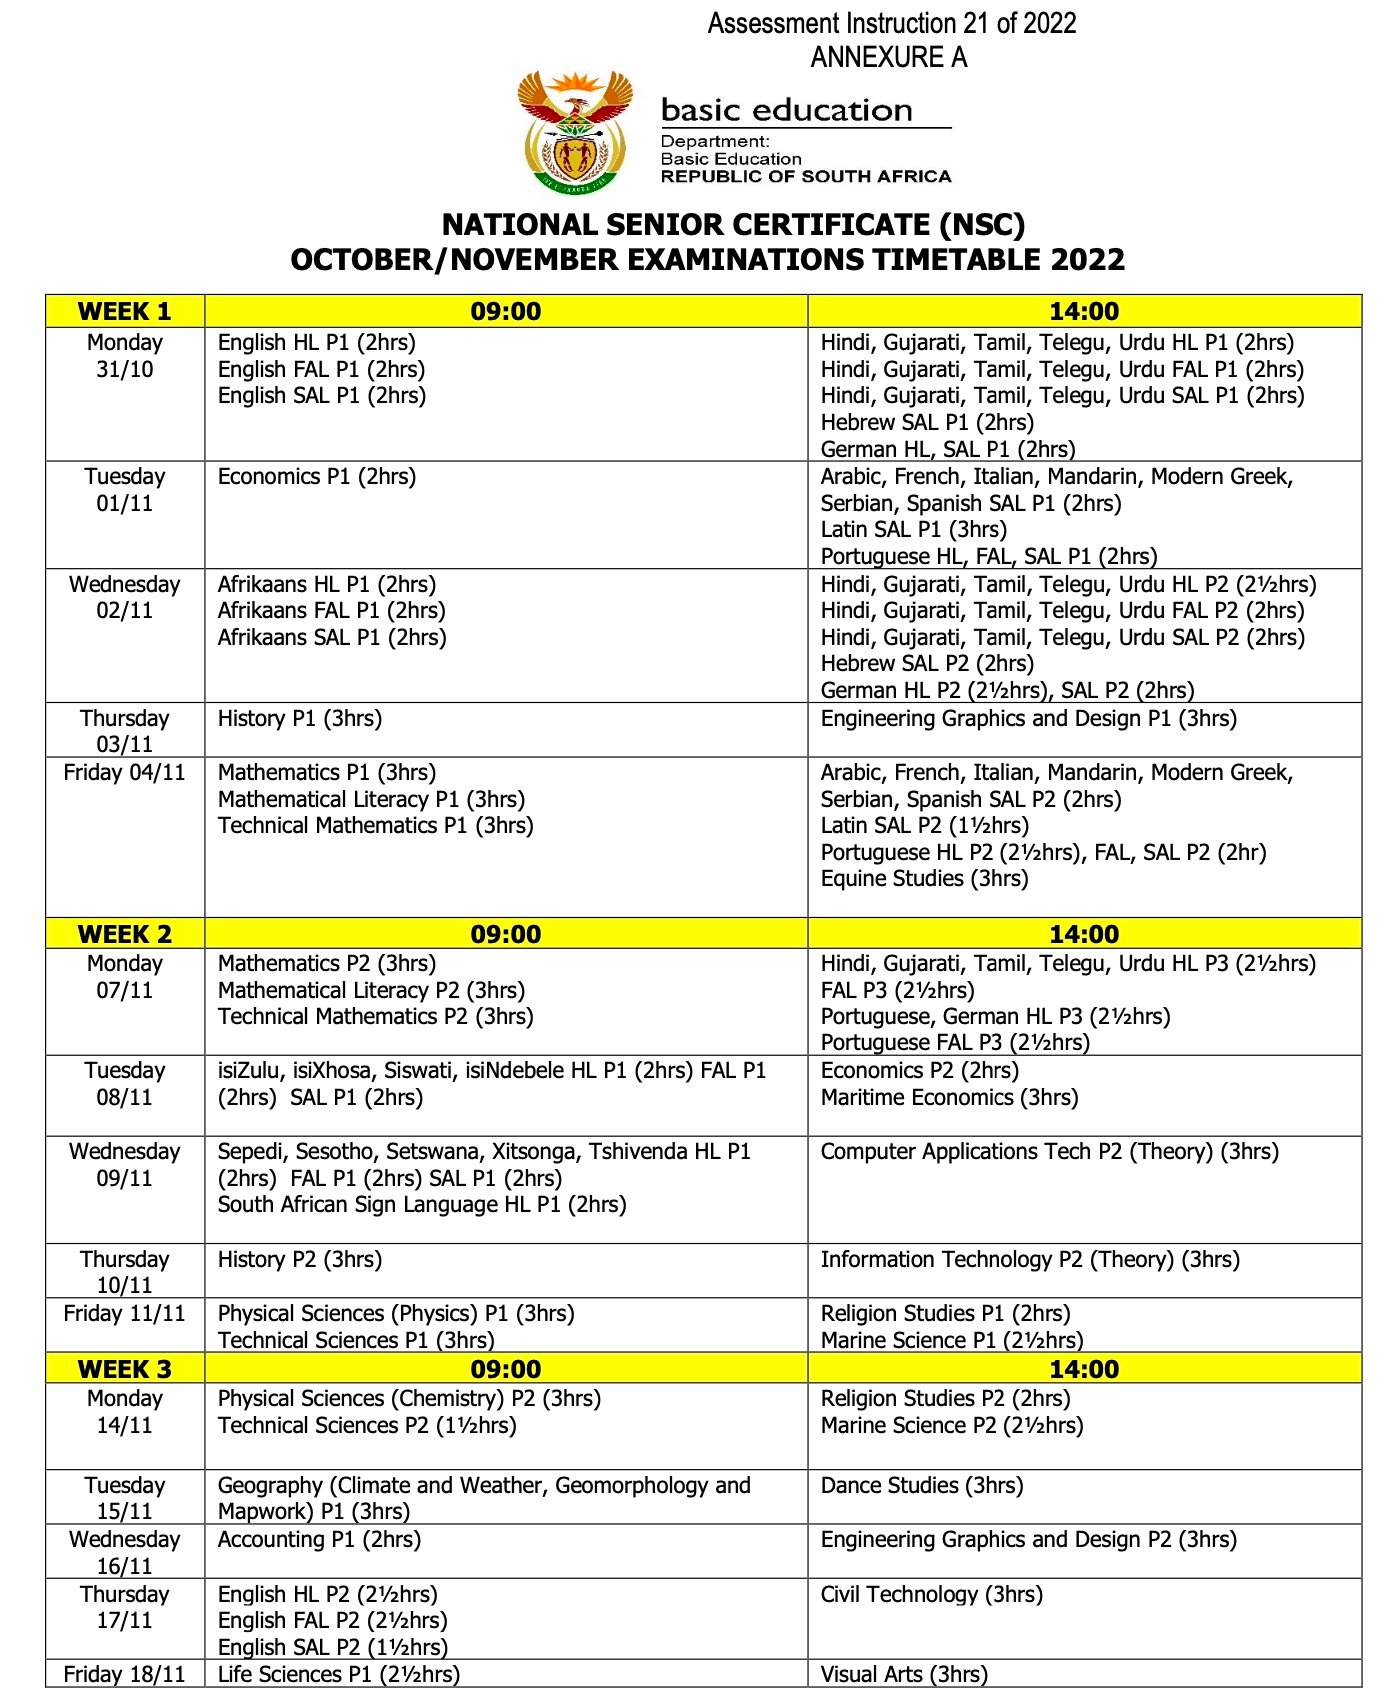 Grade 12 Matric Final Exam Timetable 2022 pdf October/November is out